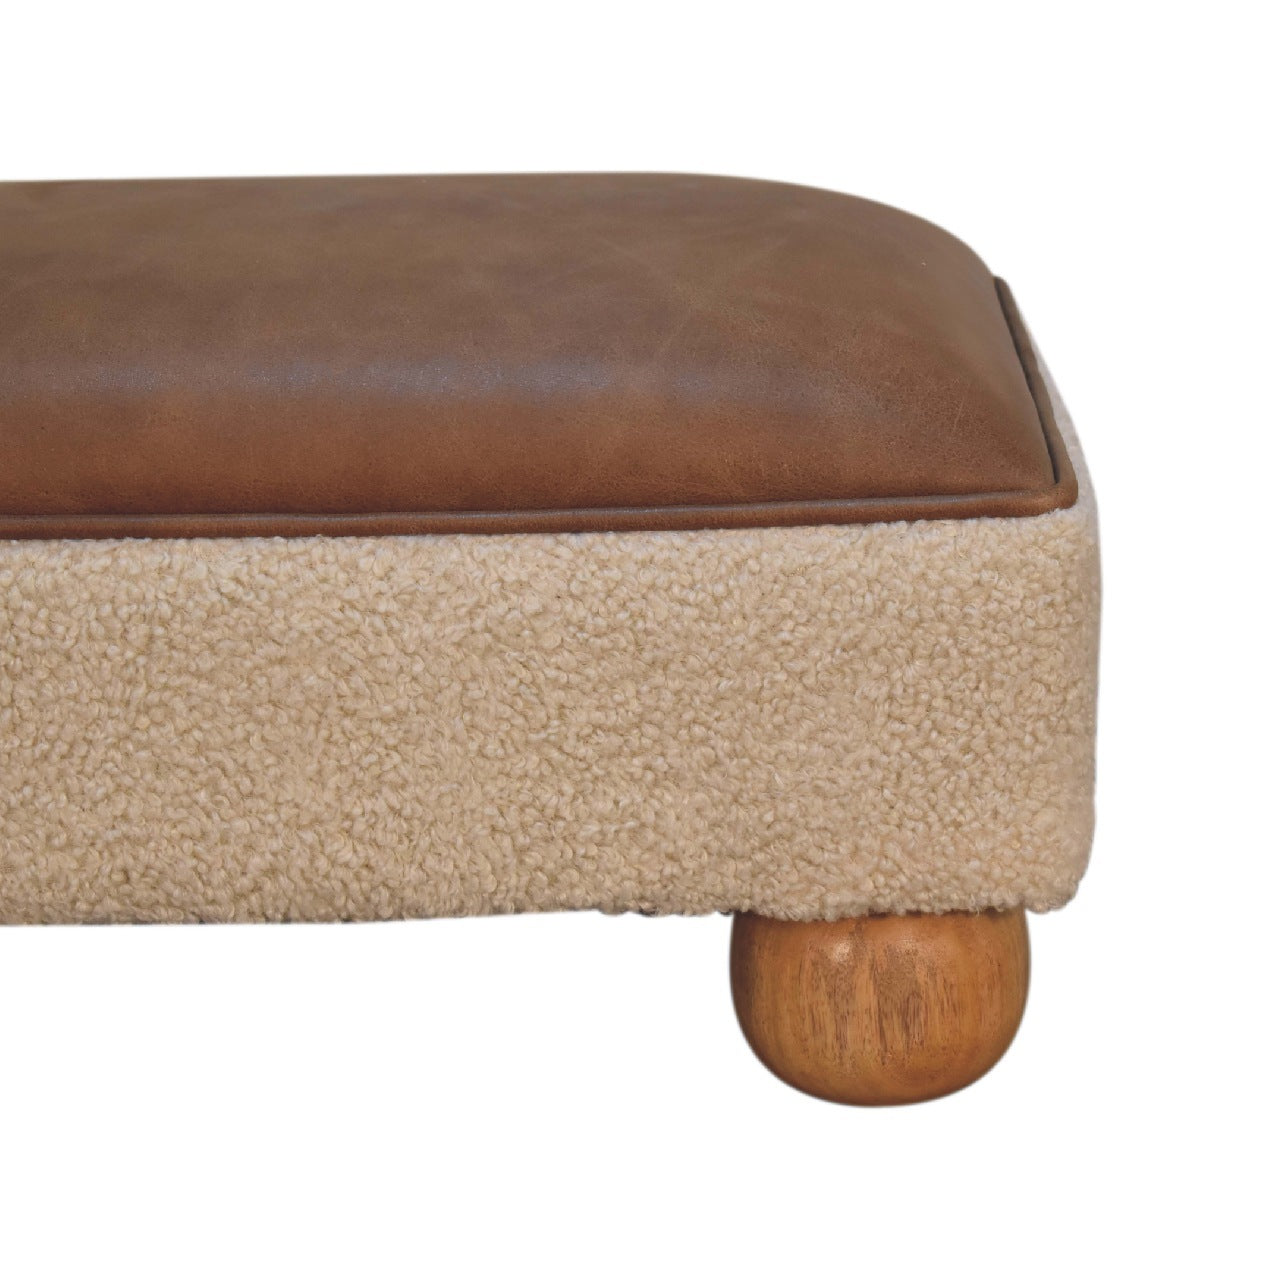 Tan Leather Boucle Ball Footstool - Tan Leather